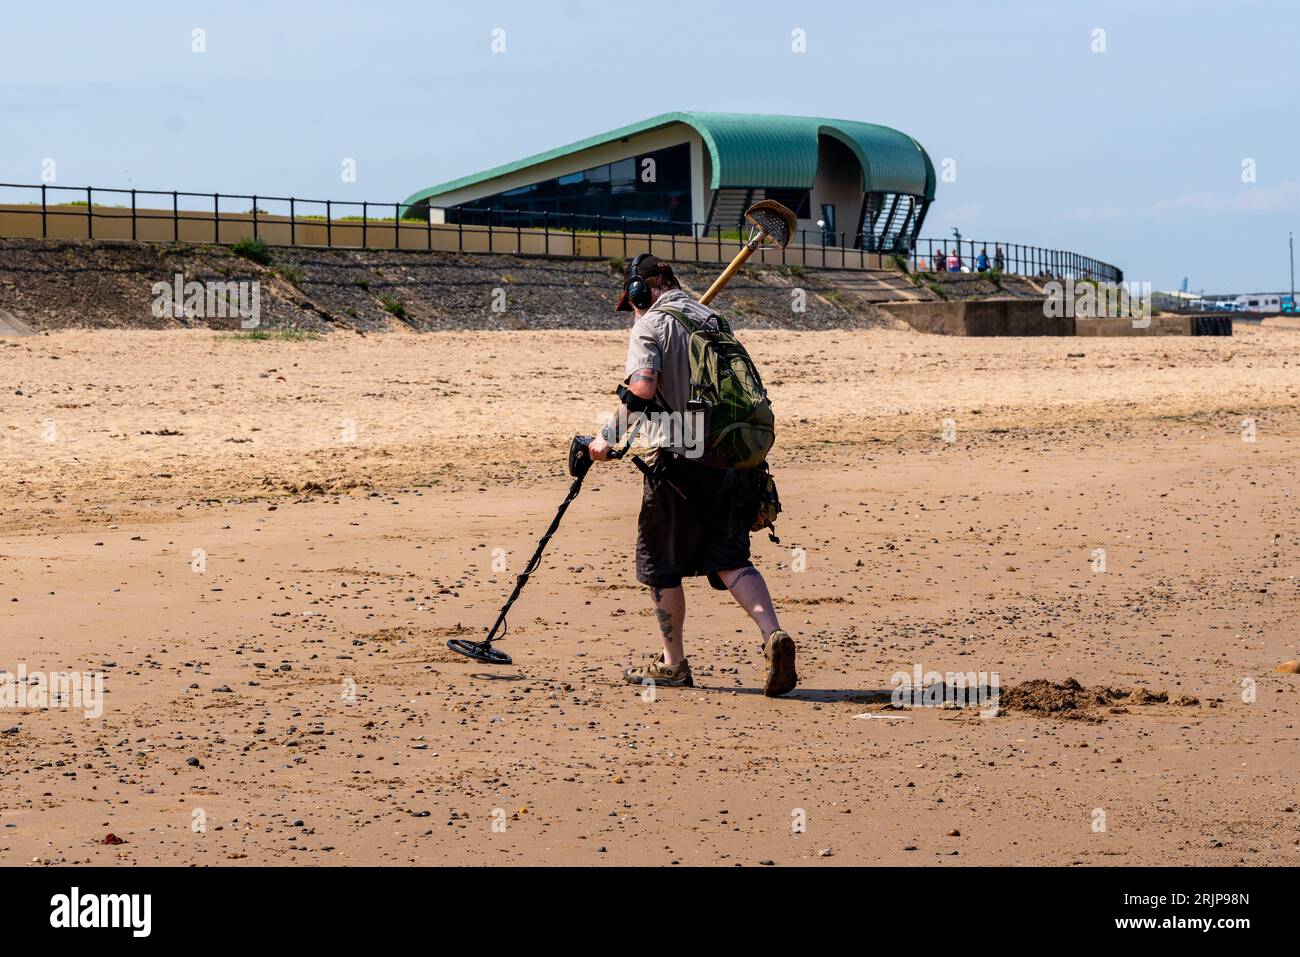 Seaside Towns, beaches and wind farms Stock Photo